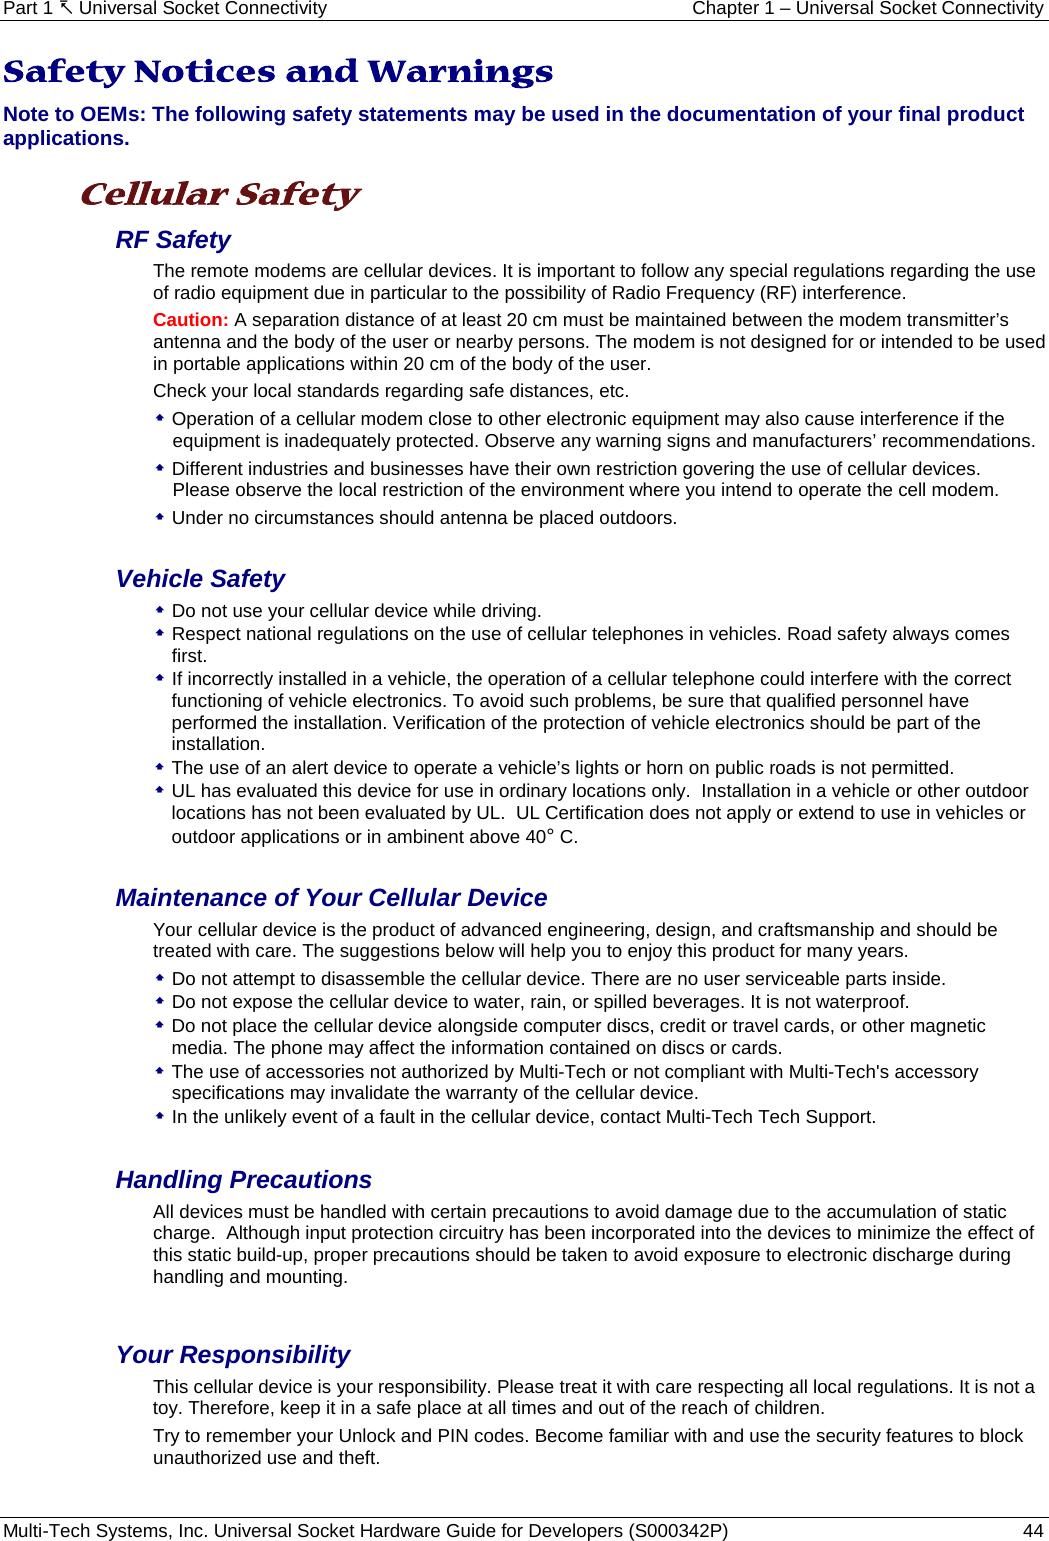 Part 1  Universal Socket Connectivity Chapter 1 – Universal Socket Connectivity Multi-Tech Systems, Inc. Universal Socket Hardware Guide for Developers (S000342P)  44  Safety Notices and Warnings Note to OEMs: The following safety statements may be used in the documentation of your final product applications.  Cellular Safety  RF Safety The remote modems are cellular devices. It is important to follow any special regulations regarding the use of radio equipment due in particular to the possibility of Radio Frequency (RF) interference.  Caution: A separation distance of at least 20 cm must be maintained between the modem transmitter’s antenna and the body of the user or nearby persons. The modem is not designed for or intended to be used in portable applications within 20 cm of the body of the user.  Check your local standards regarding safe distances, etc.  Operation of a cellular modem close to other electronic equipment may also cause interference if the equipment is inadequately protected. Observe any warning signs and manufacturers’ recommendations.  Different industries and businesses have their own restriction govering the use of cellular devices.  Please observe the local restriction of the environment where you intend to operate the cell modem.  Under no circumstances should antenna be placed outdoors.  Vehicle Safety  Do not use your cellular device while driving.  Respect national regulations on the use of cellular telephones in vehicles. Road safety always comes first.  If incorrectly installed in a vehicle, the operation of a cellular telephone could interfere with the correct functioning of vehicle electronics. To avoid such problems, be sure that qualified personnel have performed the installation. Verification of the protection of vehicle electronics should be part of the installation.  The use of an alert device to operate a vehicle’s lights or horn on public roads is not permitted.  UL has evaluated this device for use in ordinary locations only.  Installation in a vehicle or other outdoor locations has not been evaluated by UL.  UL Certification does not apply or extend to use in vehicles or outdoor applications or in ambinent above 40° C.  Maintenance of Your Cellular Device Your cellular device is the product of advanced engineering, design, and craftsmanship and should be treated with care. The suggestions below will help you to enjoy this product for many years.  Do not attempt to disassemble the cellular device. There are no user serviceable parts inside.  Do not expose the cellular device to water, rain, or spilled beverages. It is not waterproof.  Do not place the cellular device alongside computer discs, credit or travel cards, or other magnetic media. The phone may affect the information contained on discs or cards.  The use of accessories not authorized by Multi-Tech or not compliant with Multi-Tech&apos;s accessory specifications may invalidate the warranty of the cellular device.  In the unlikely event of a fault in the cellular device, contact Multi-Tech Tech Support.  Handling Precautions All devices must be handled with certain precautions to avoid damage due to the accumulation of static charge.  Although input protection circuitry has been incorporated into the devices to minimize the effect of this static build-up, proper precautions should be taken to avoid exposure to electronic discharge during handling and mounting.  Your Responsibility This cellular device is your responsibility. Please treat it with care respecting all local regulations. It is not a toy. Therefore, keep it in a safe place at all times and out of the reach of children. Try to remember your Unlock and PIN codes. Become familiar with and use the security features to block unauthorized use and theft.  